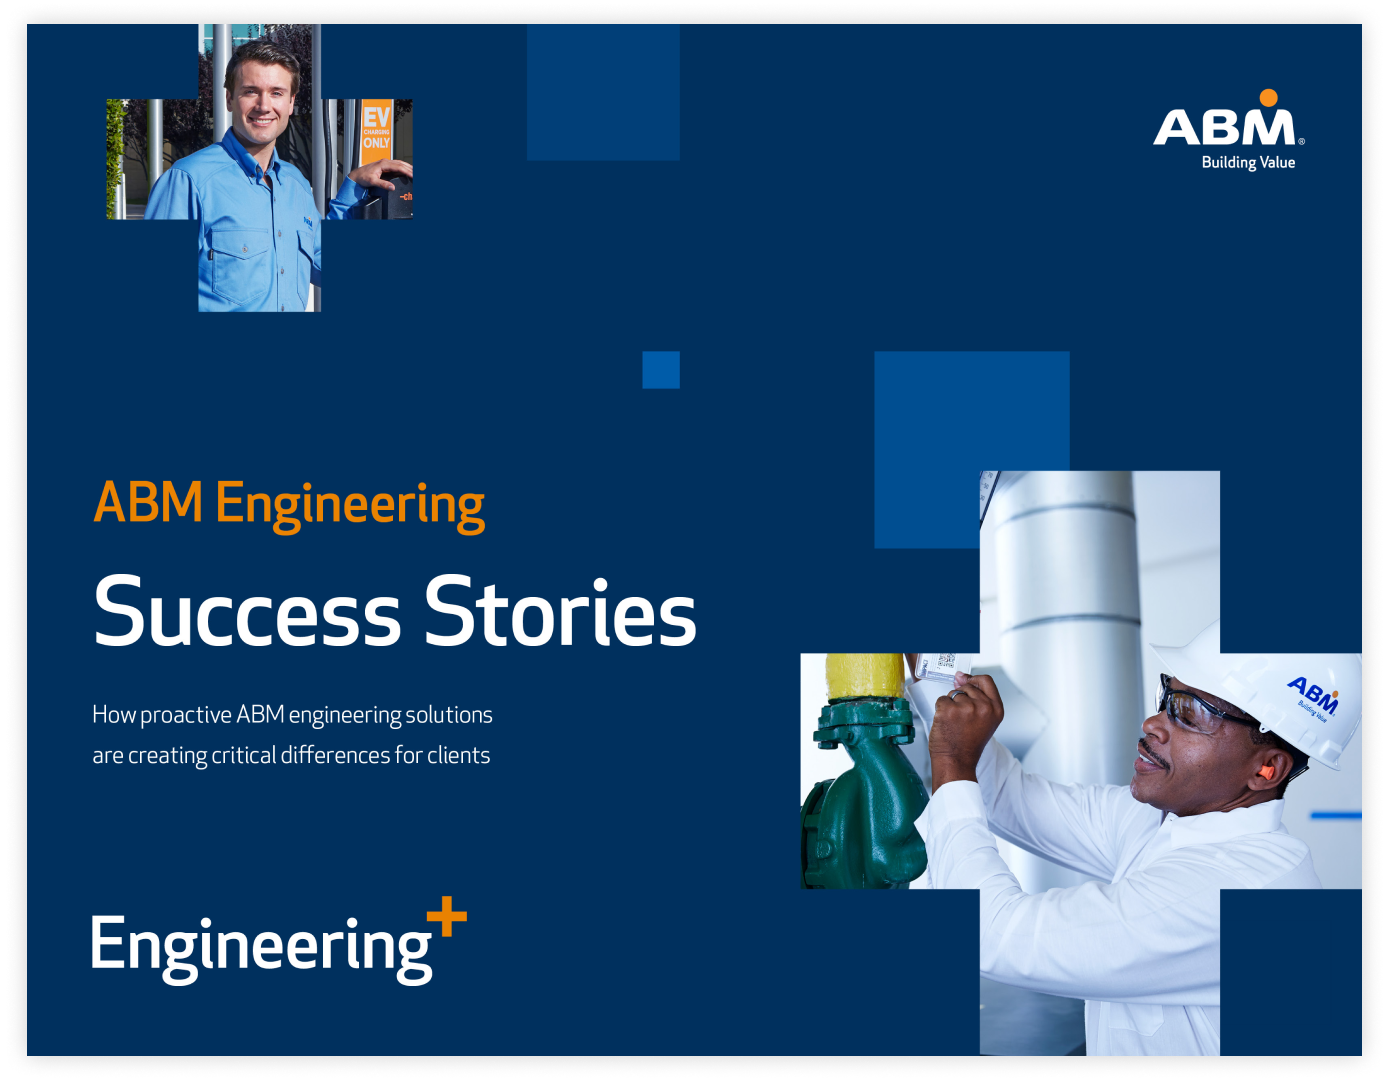 Cover of collection, featuring two male ABM engineers framed within plus signs. Headline reads “ABM Engineering Success Stories”